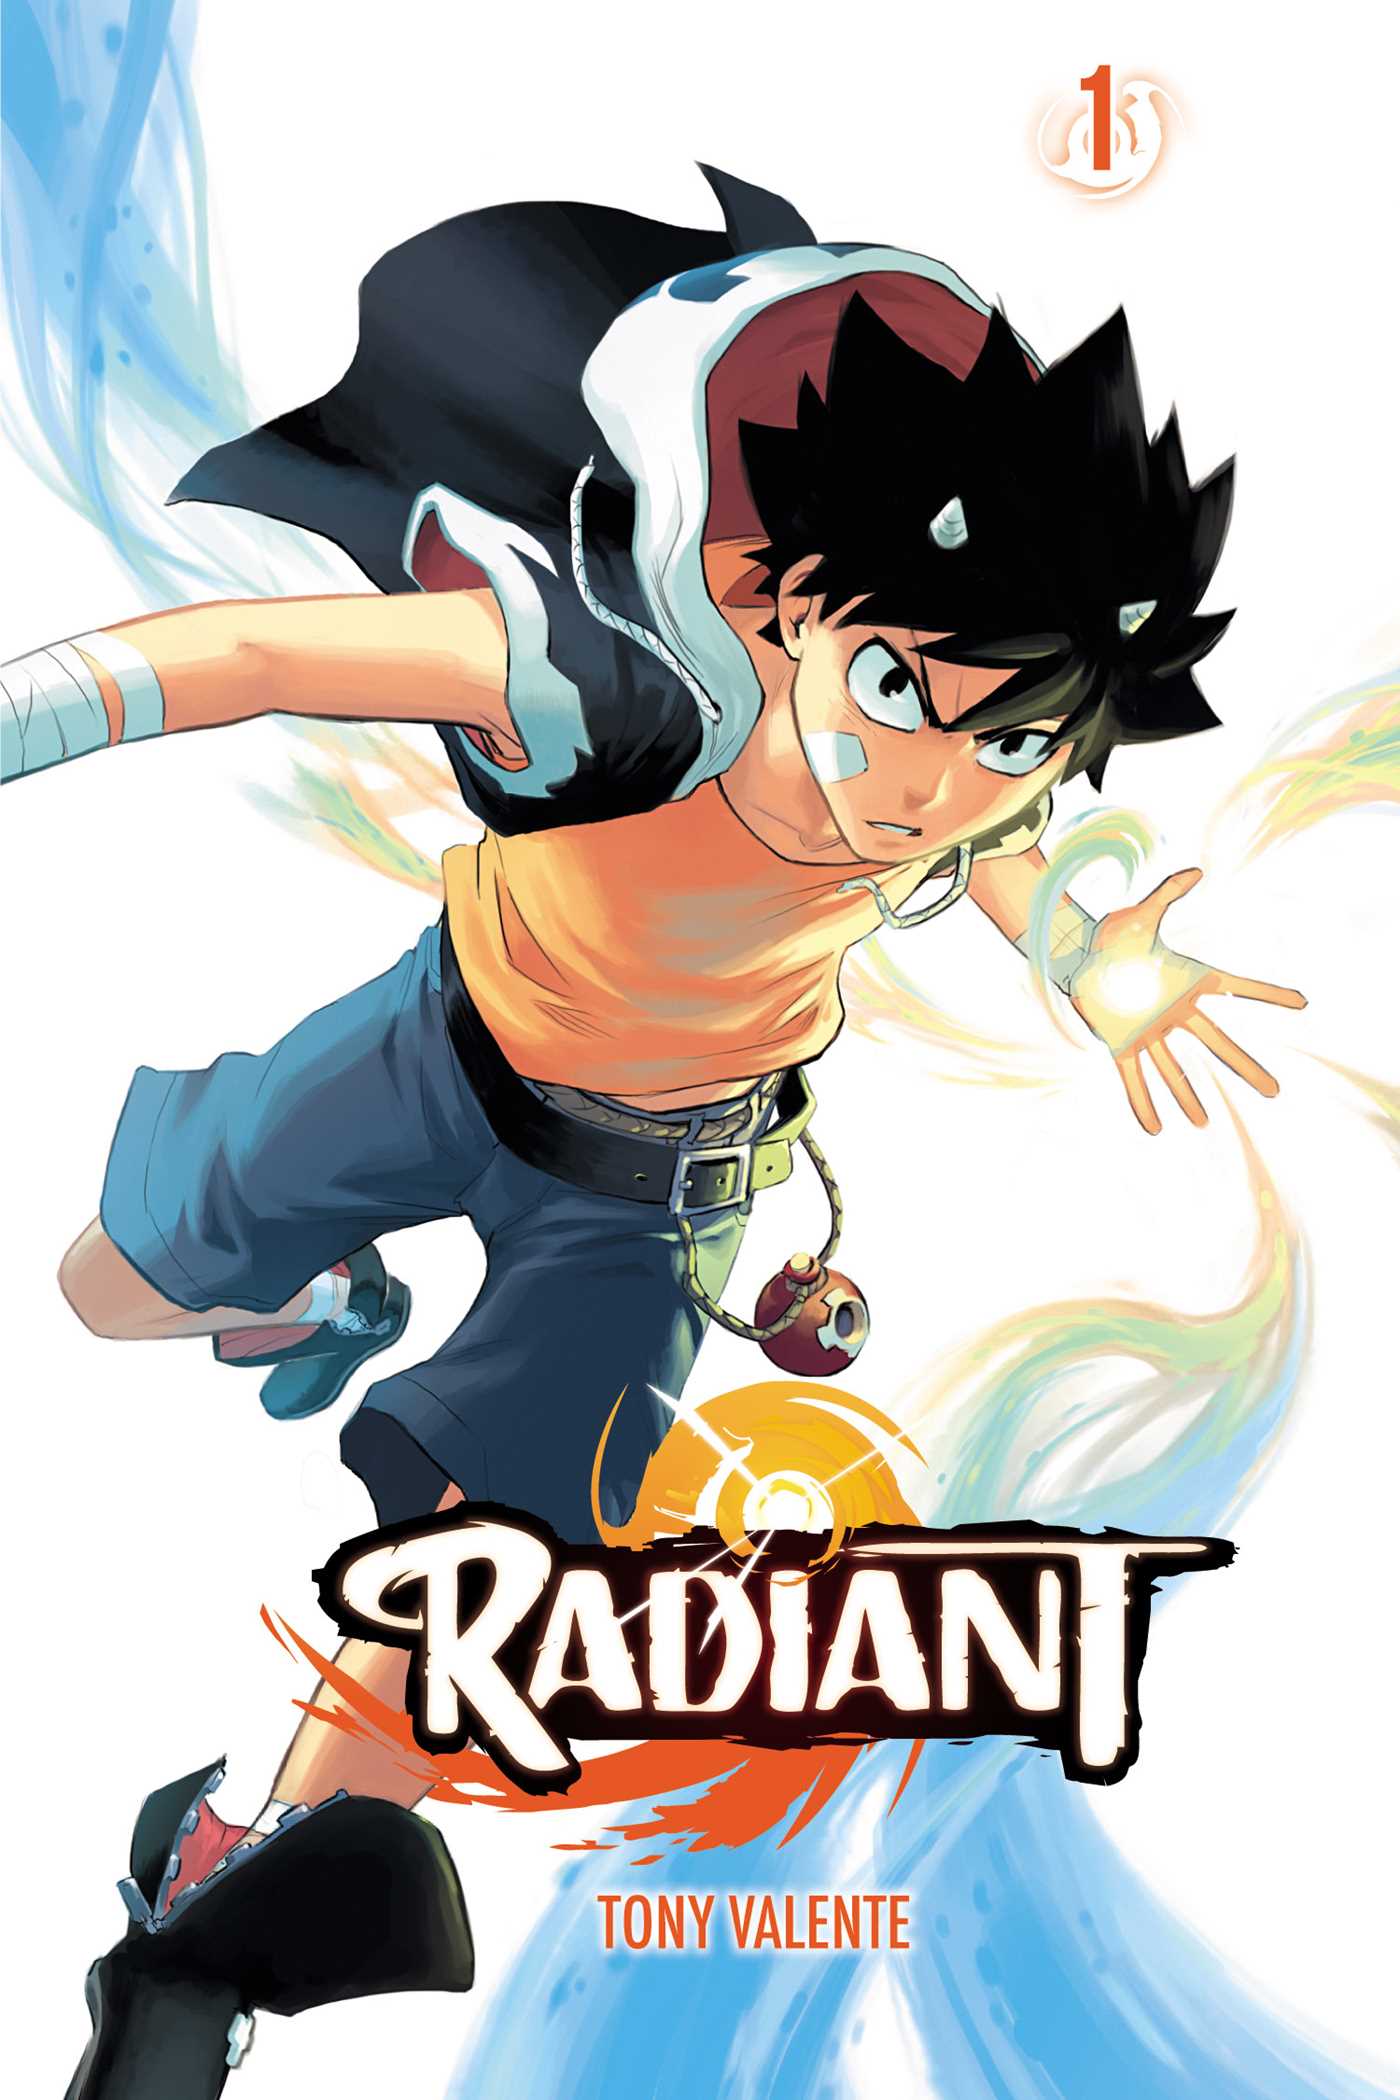 Radiant Vol. 1 Review